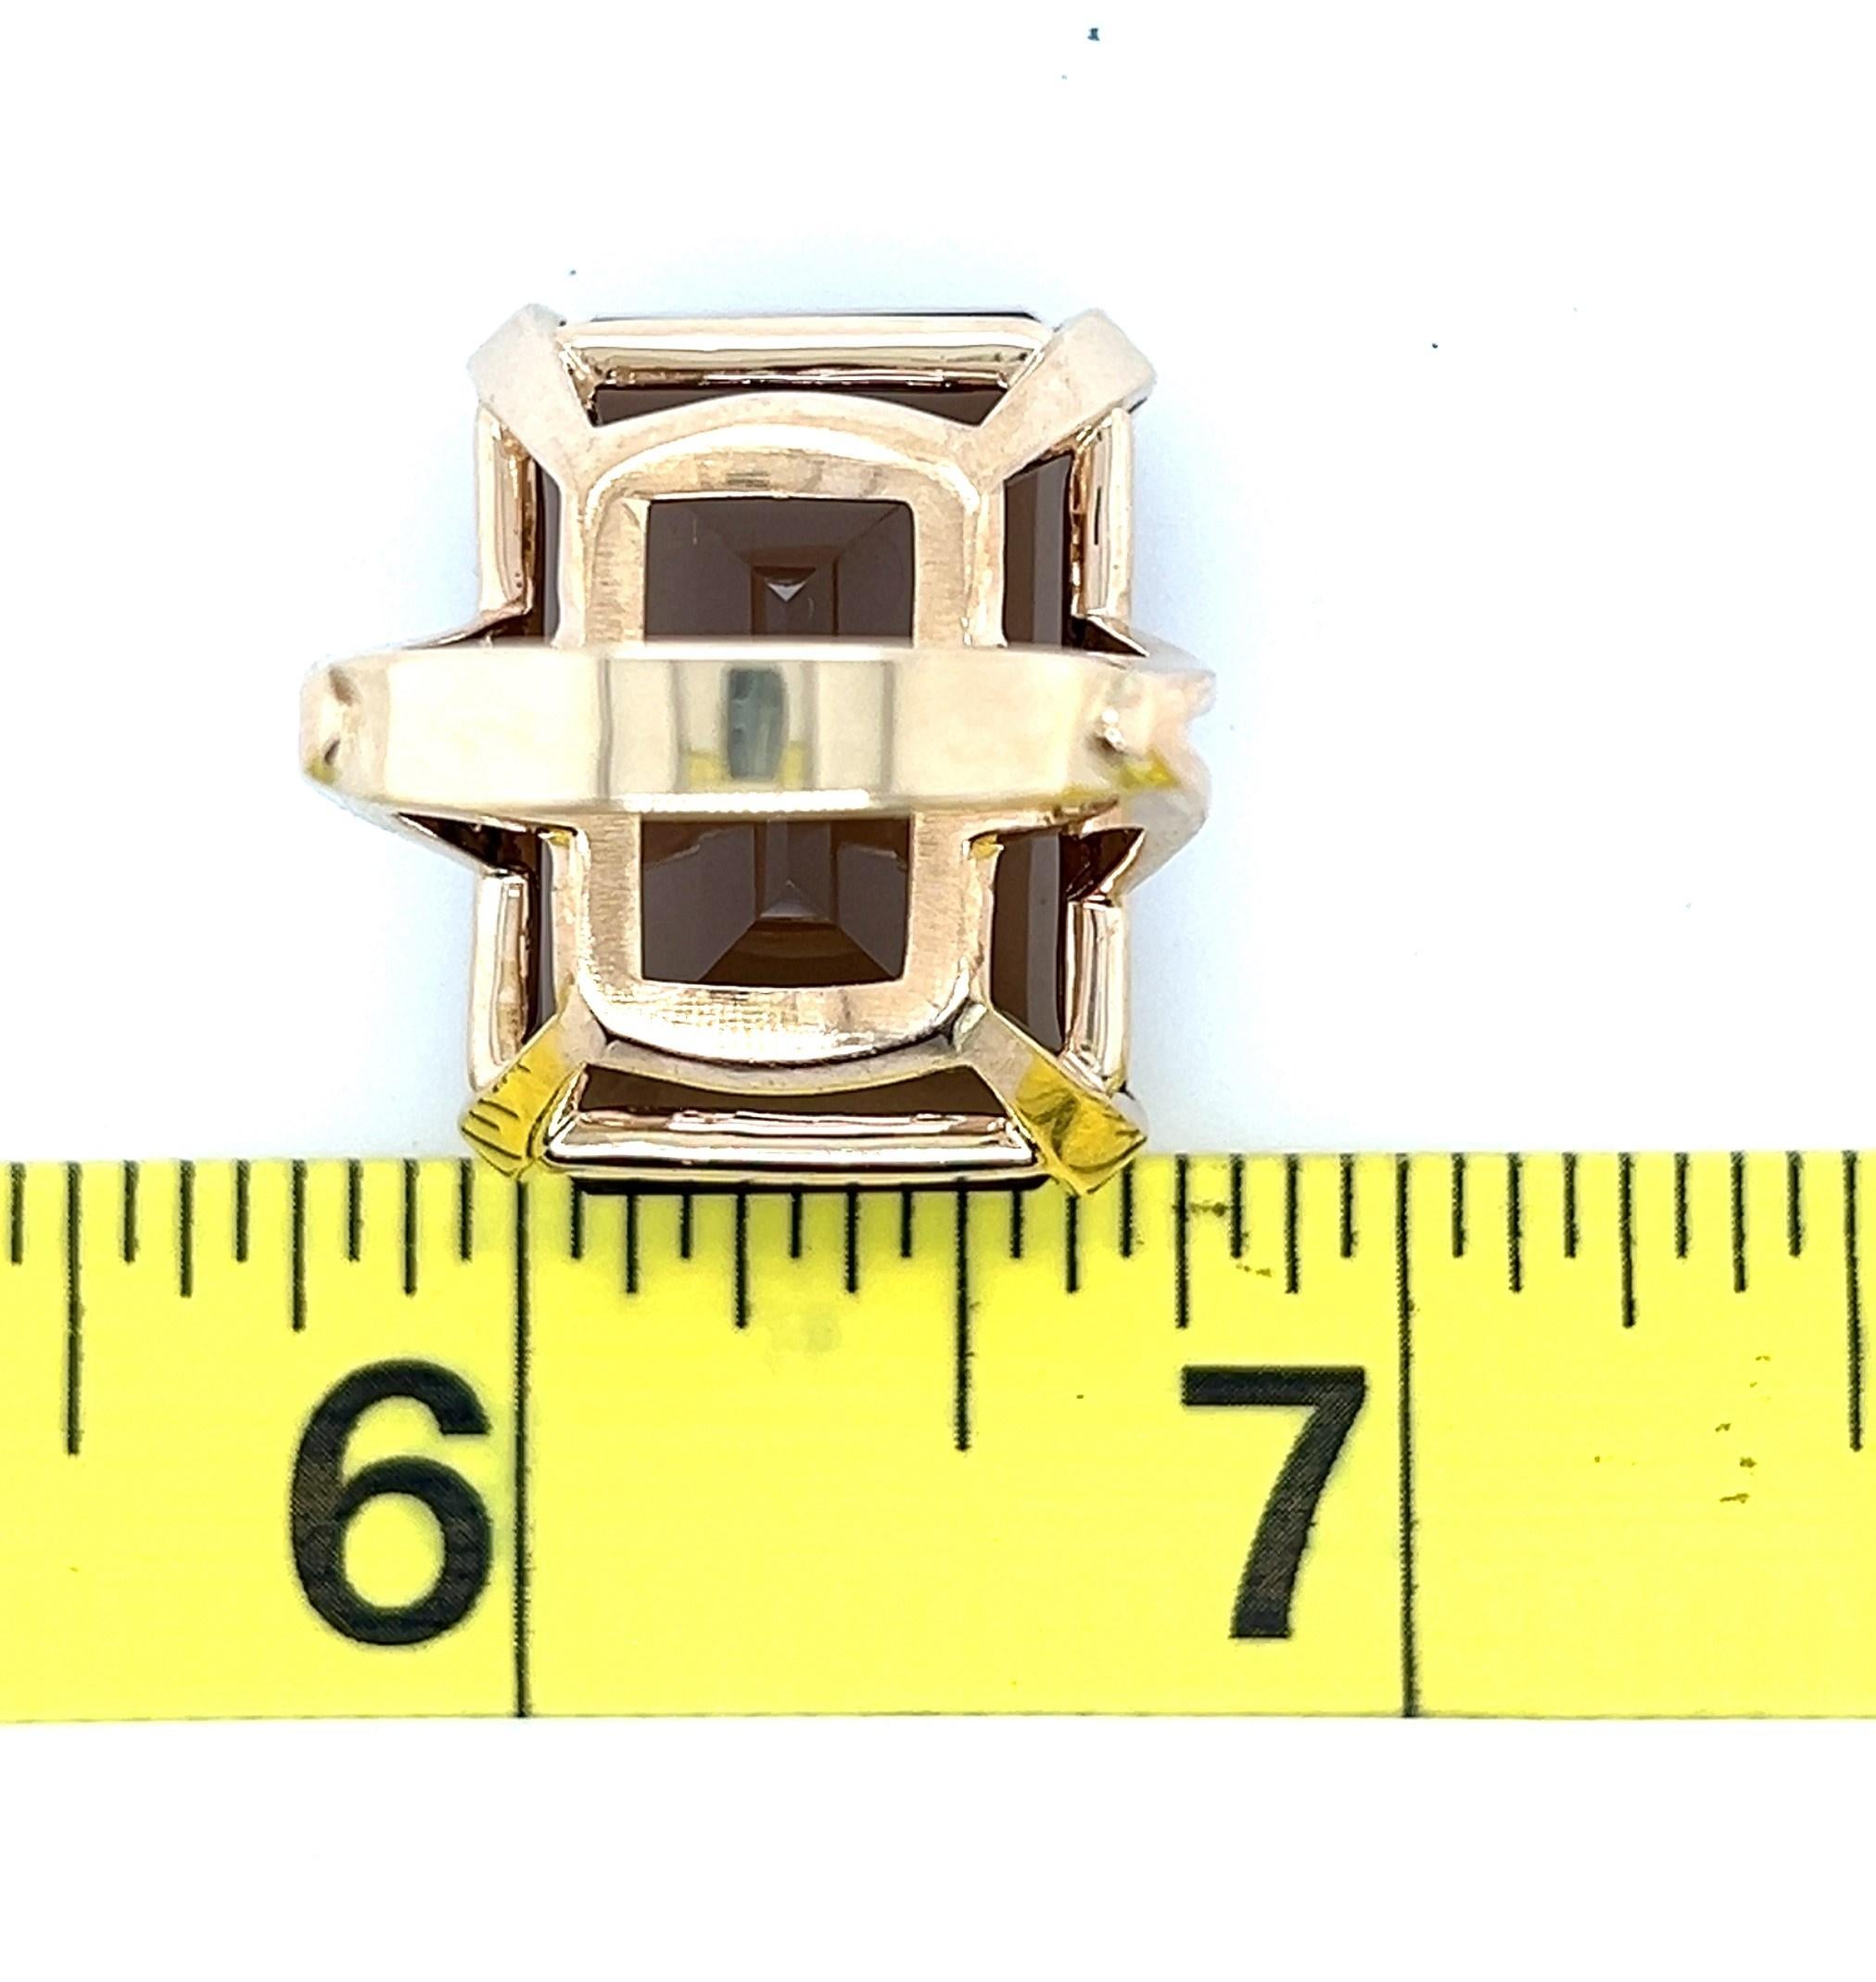 28.82 Carat Smoky Quartz Ring in 14Kt Gold  In Good Condition For Sale In Towson, MD